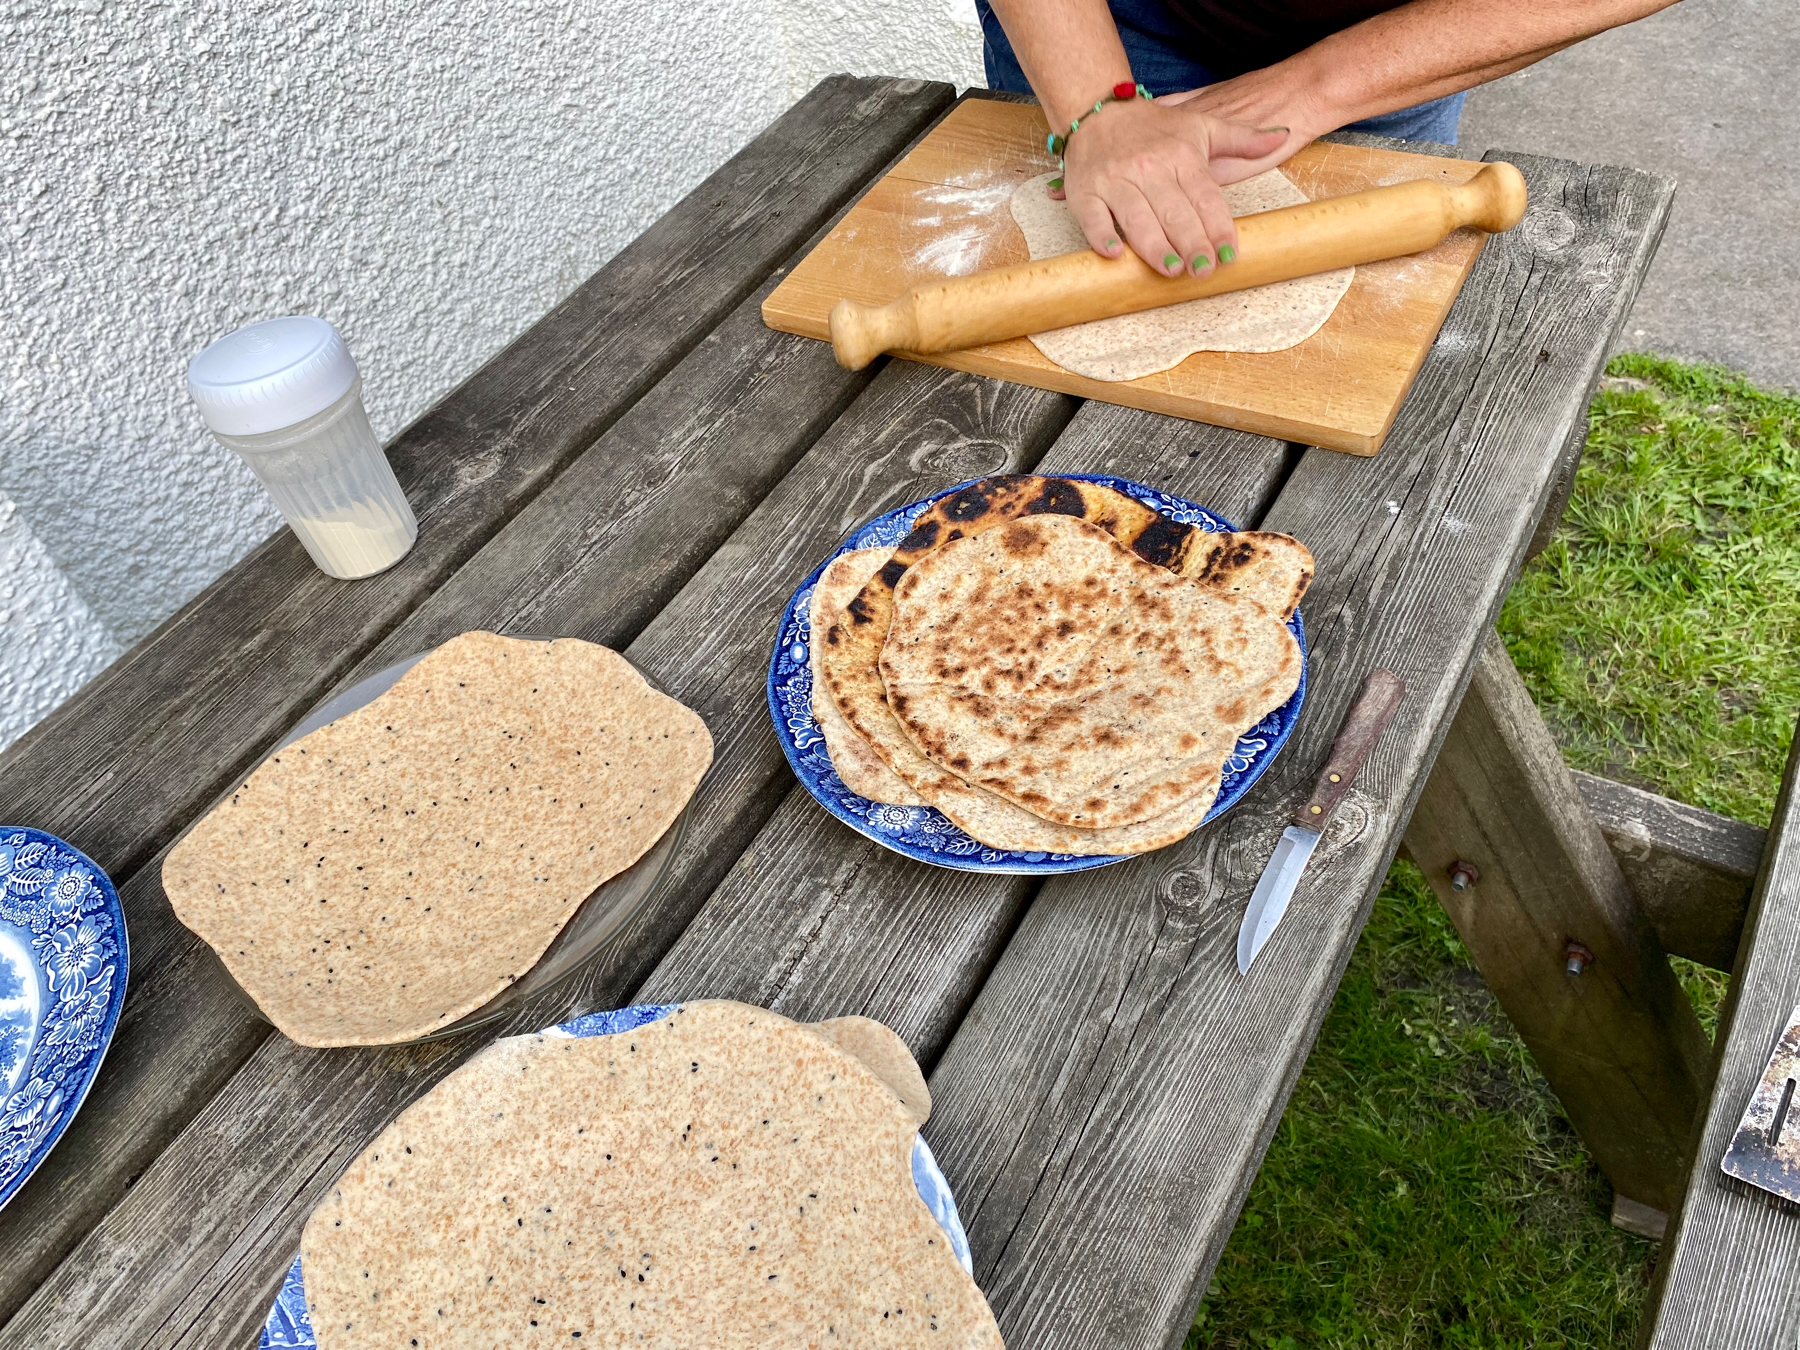 Table with plates containing cooked and uncooked flatbreads. One flatbread in process of being rolled out